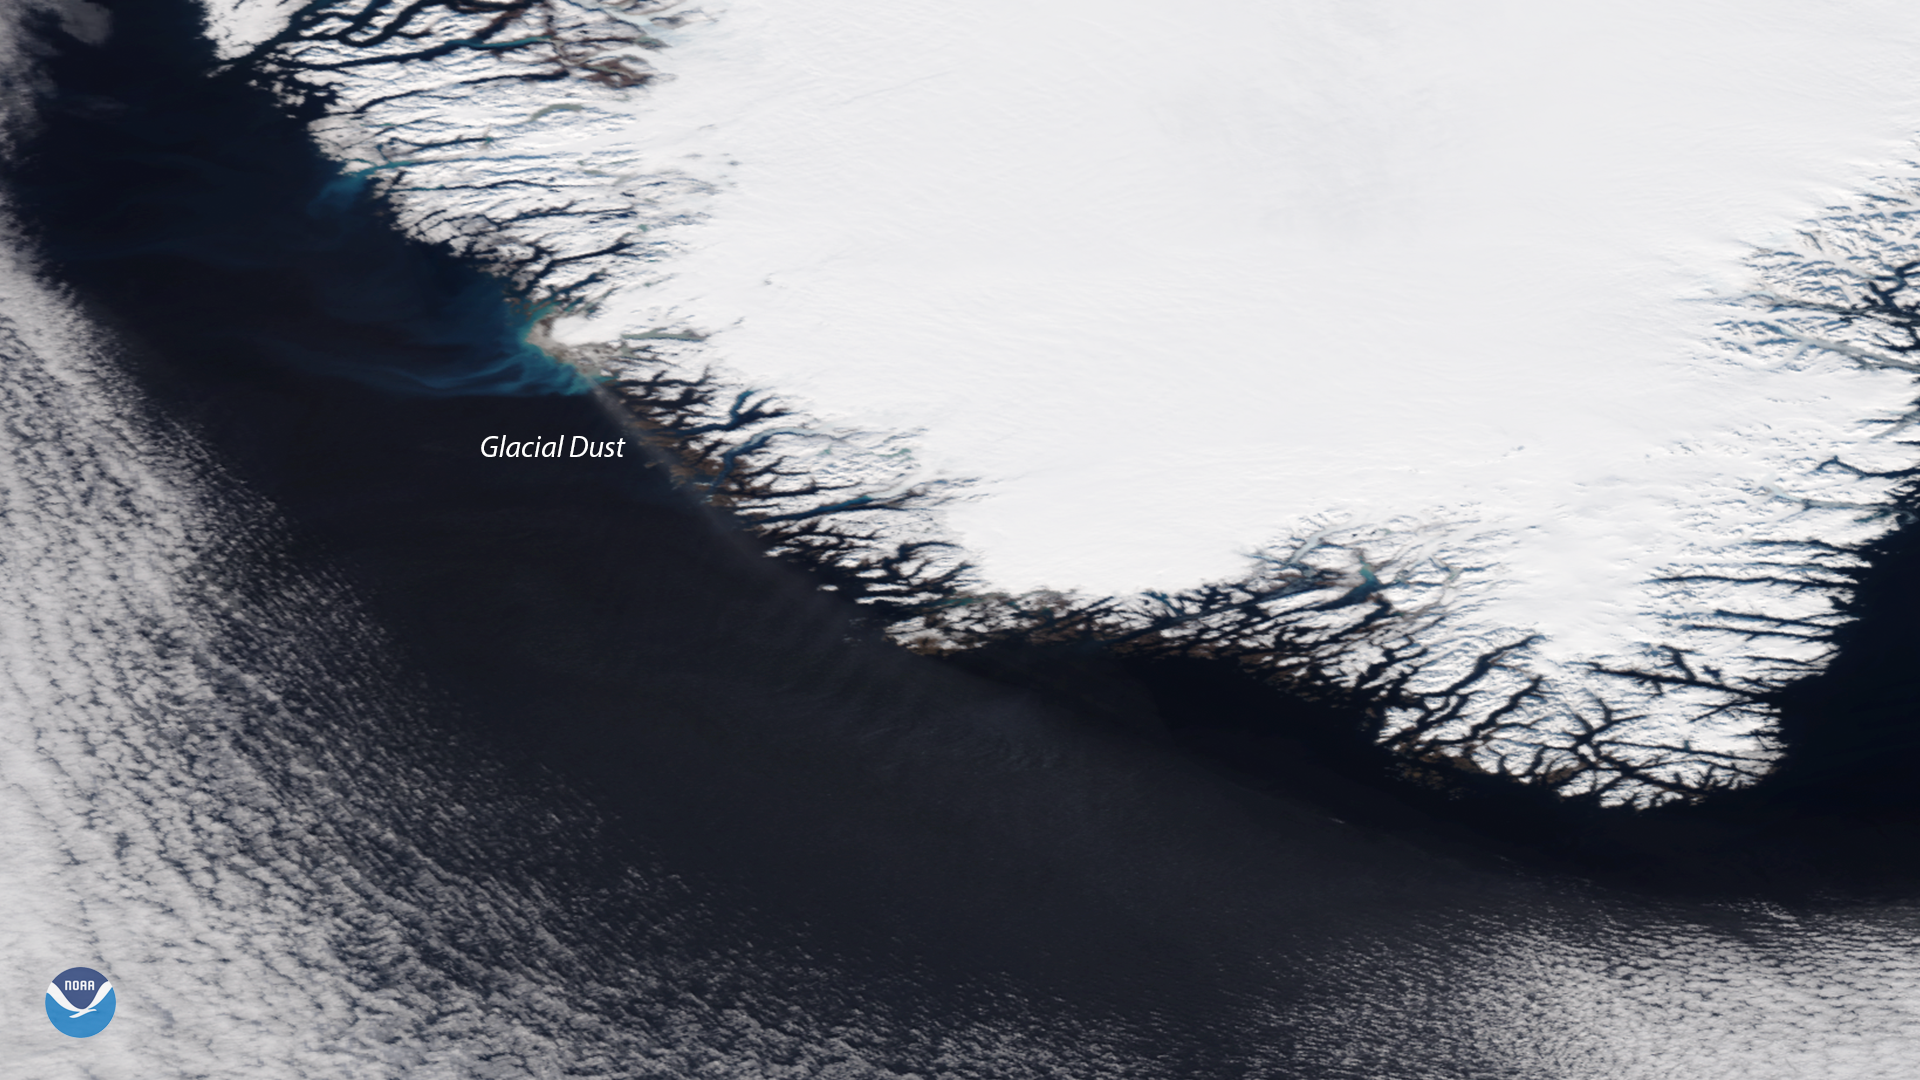 Glacial Dust Spotted Off the Coast of Greenland